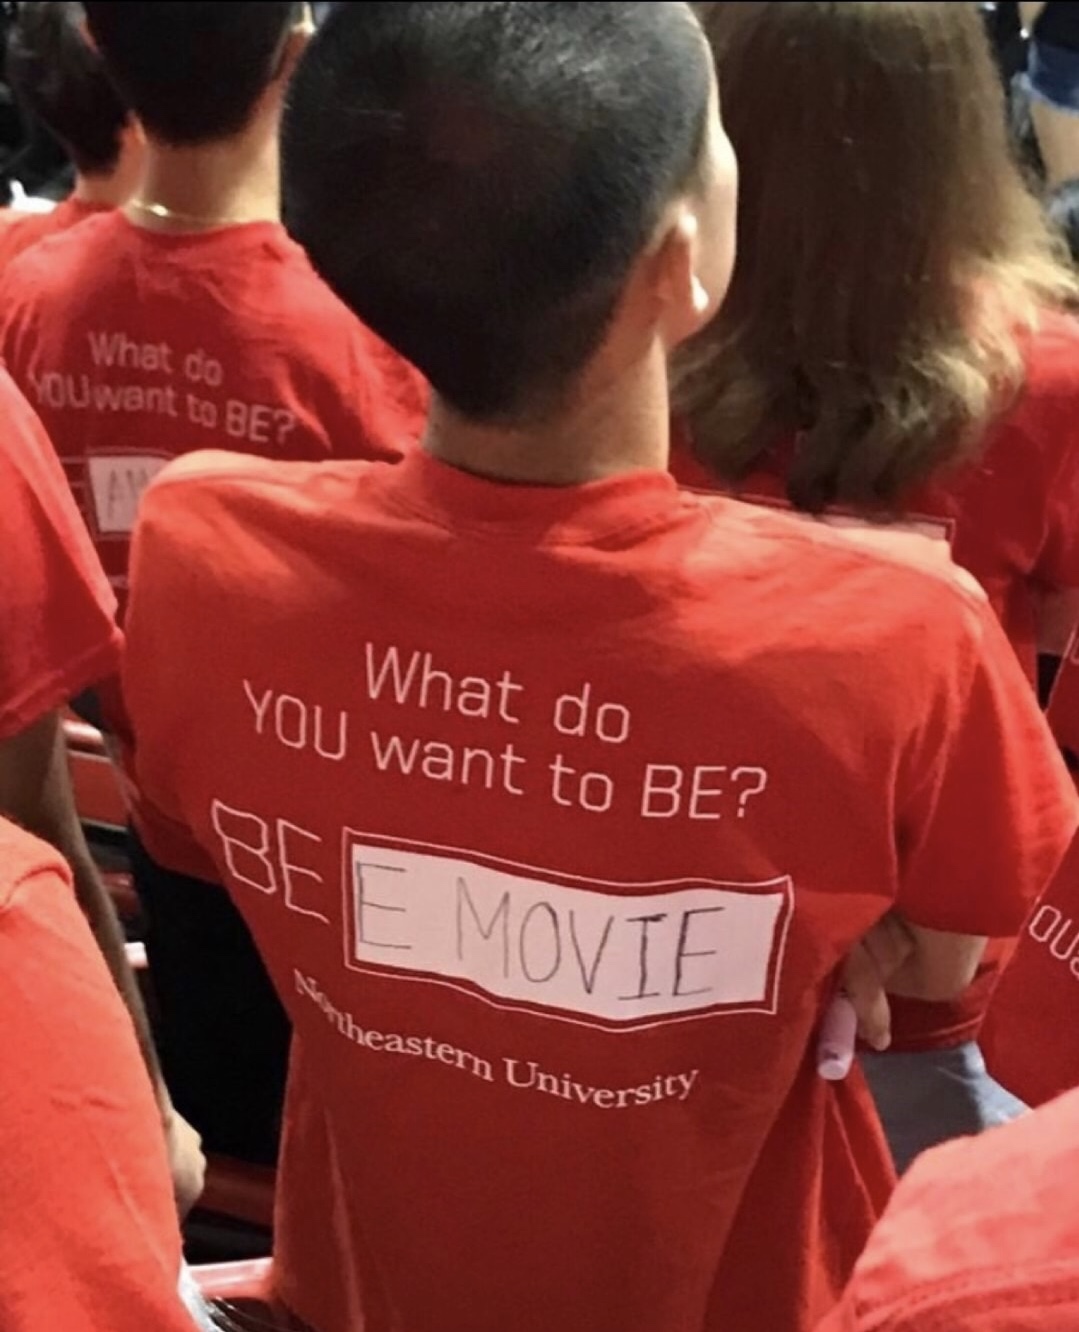 Internet meme - What do Vou want to Bep What do You want to Be? Uu Movie heastern Univers!